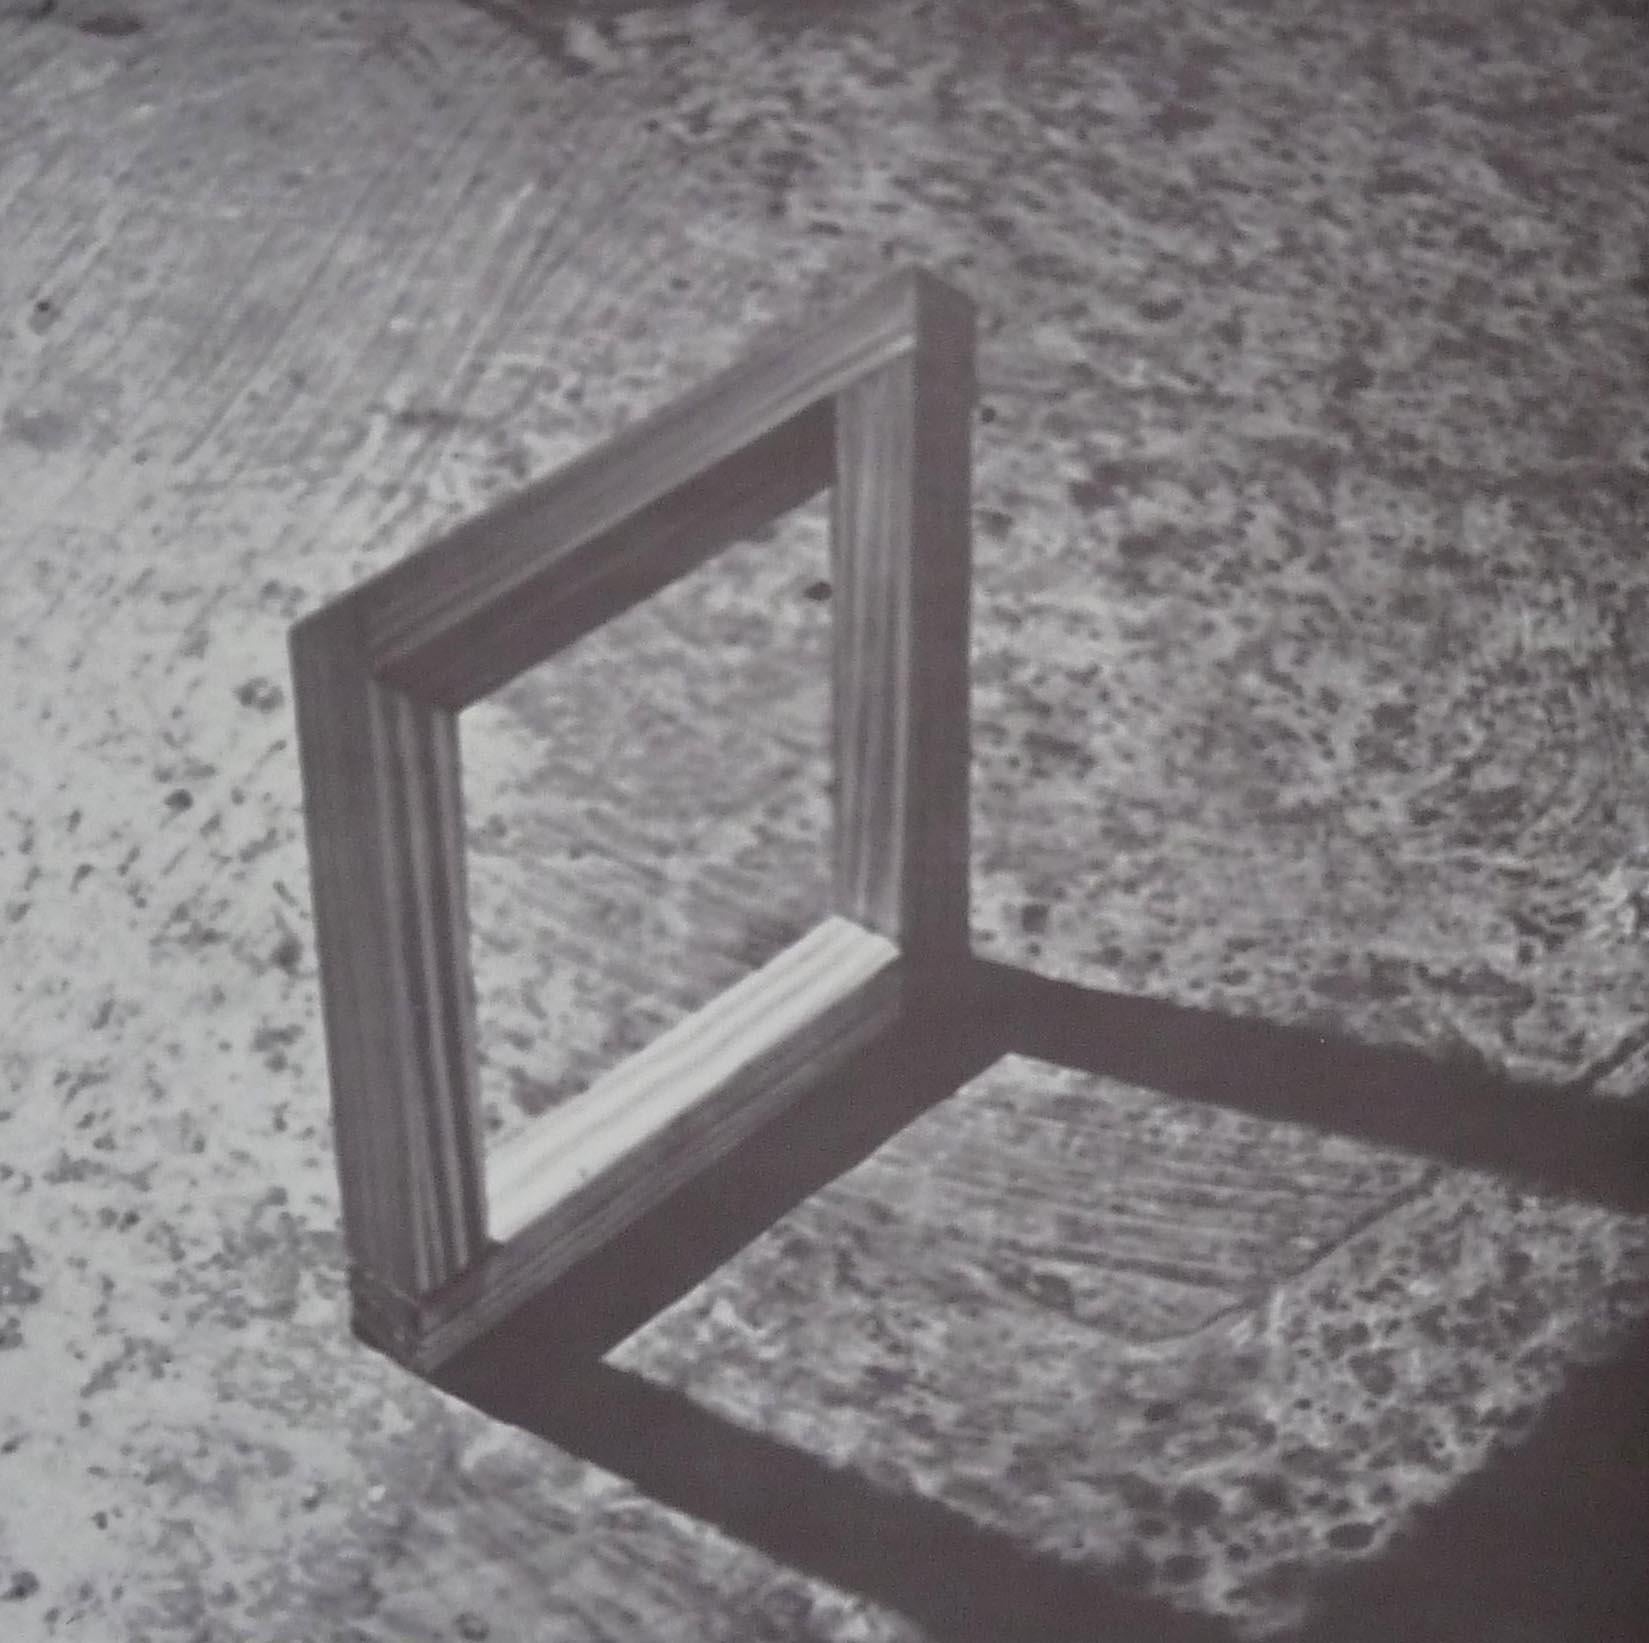 Gerhard Richter Abstract Print - Square with Shadow, from: Nine Objects - German Realism